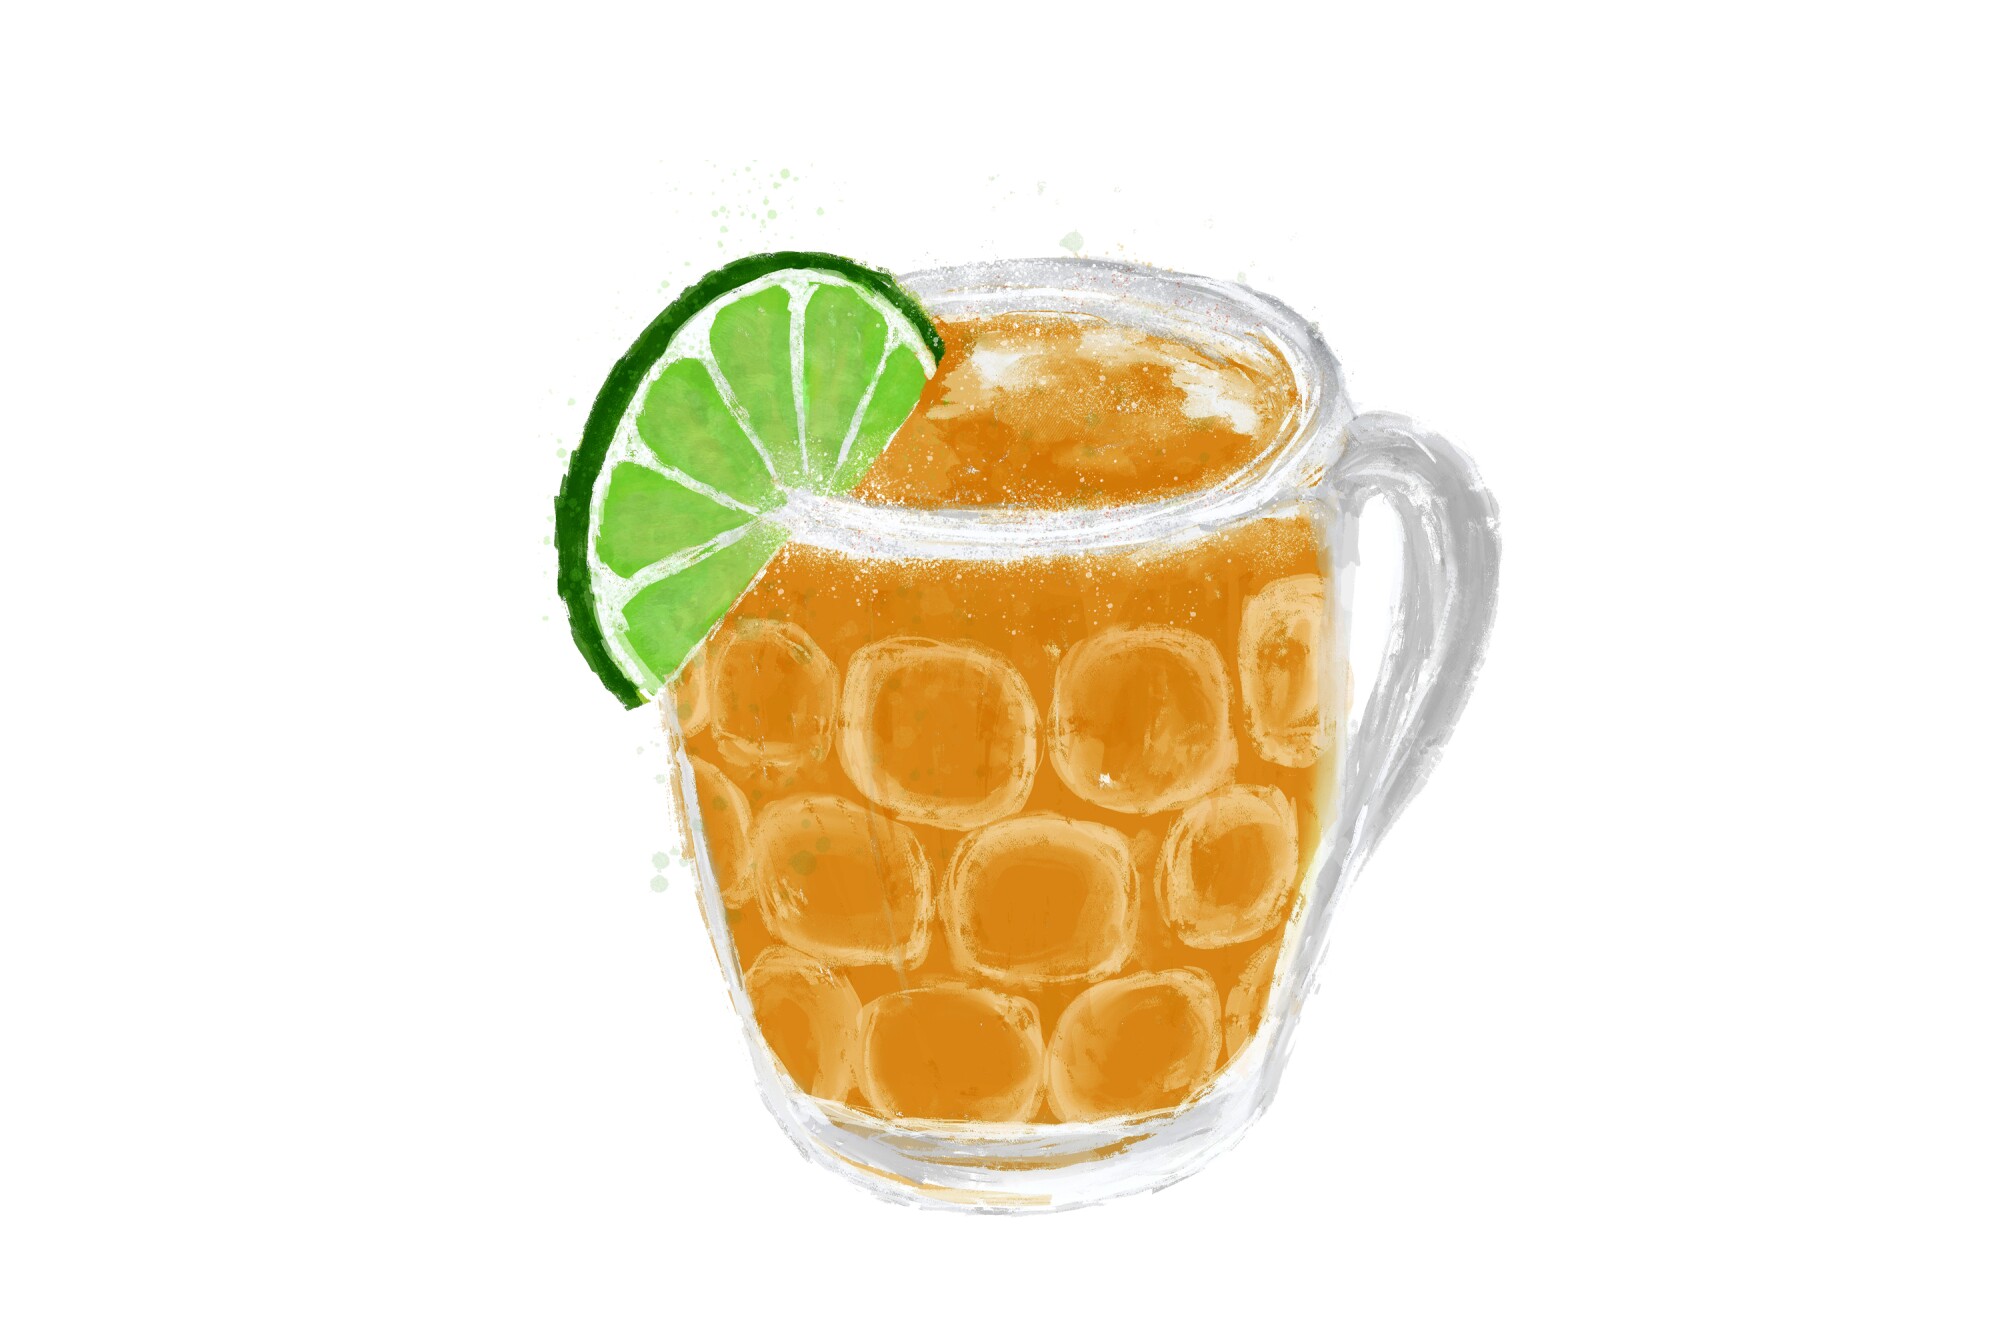 Chelada: Salt, lime, ice, lime. Serve in a frosted glass with rim salt.